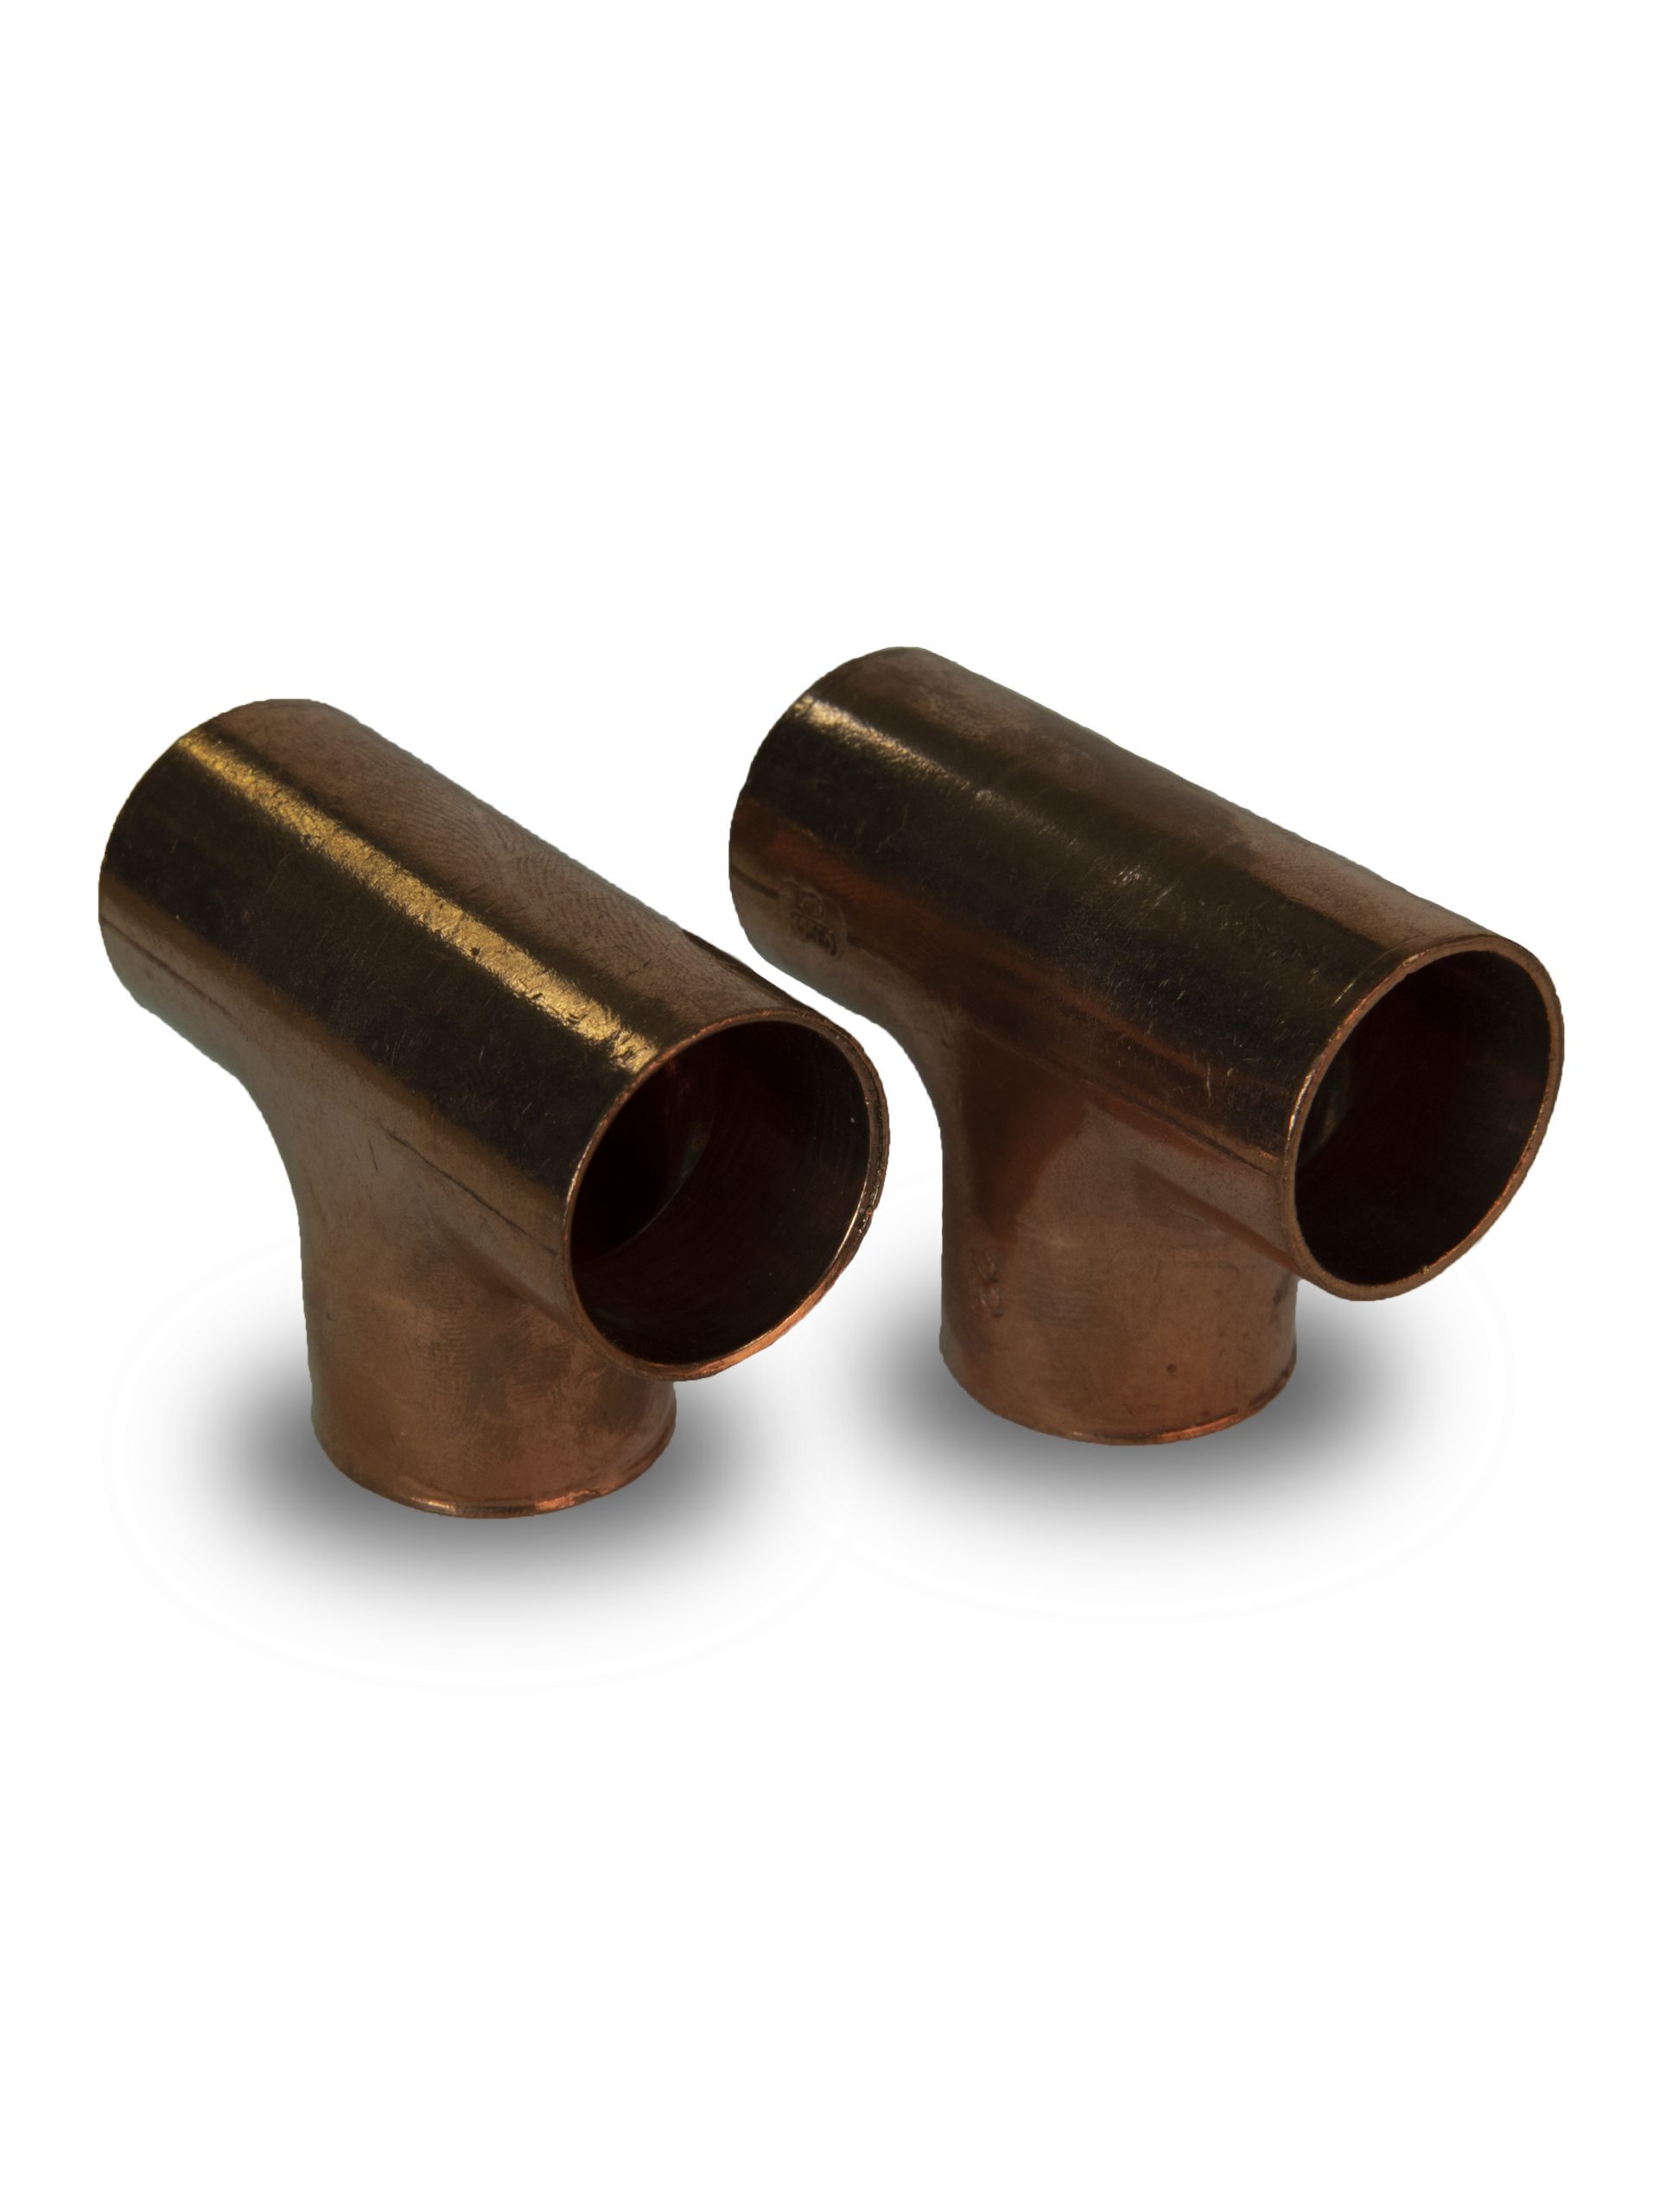 COPPER TEE18MM, COMAP-CLESSE from Gas Equipment Company Llc Abu Dhabi, UNITED ARAB EMIRATES